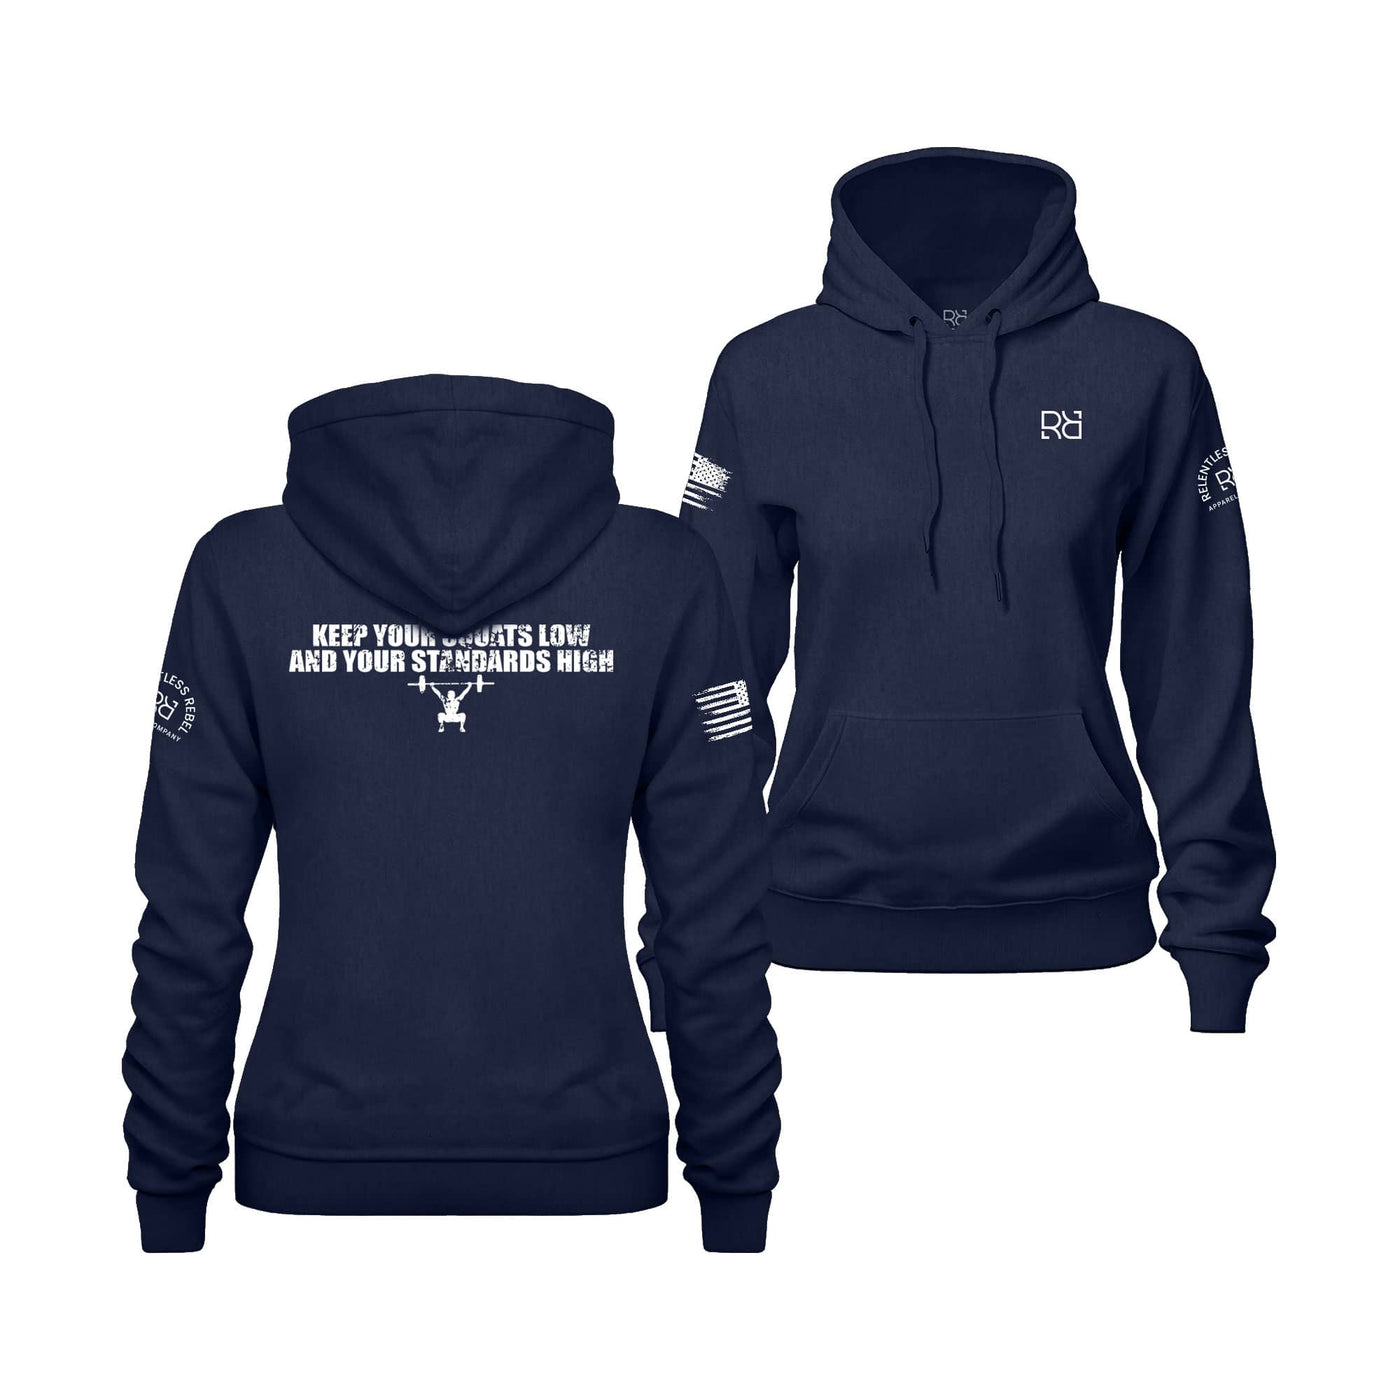 Navy Blue Women's Keep Your Squats Low and Your Standards High Back Design Hoodie